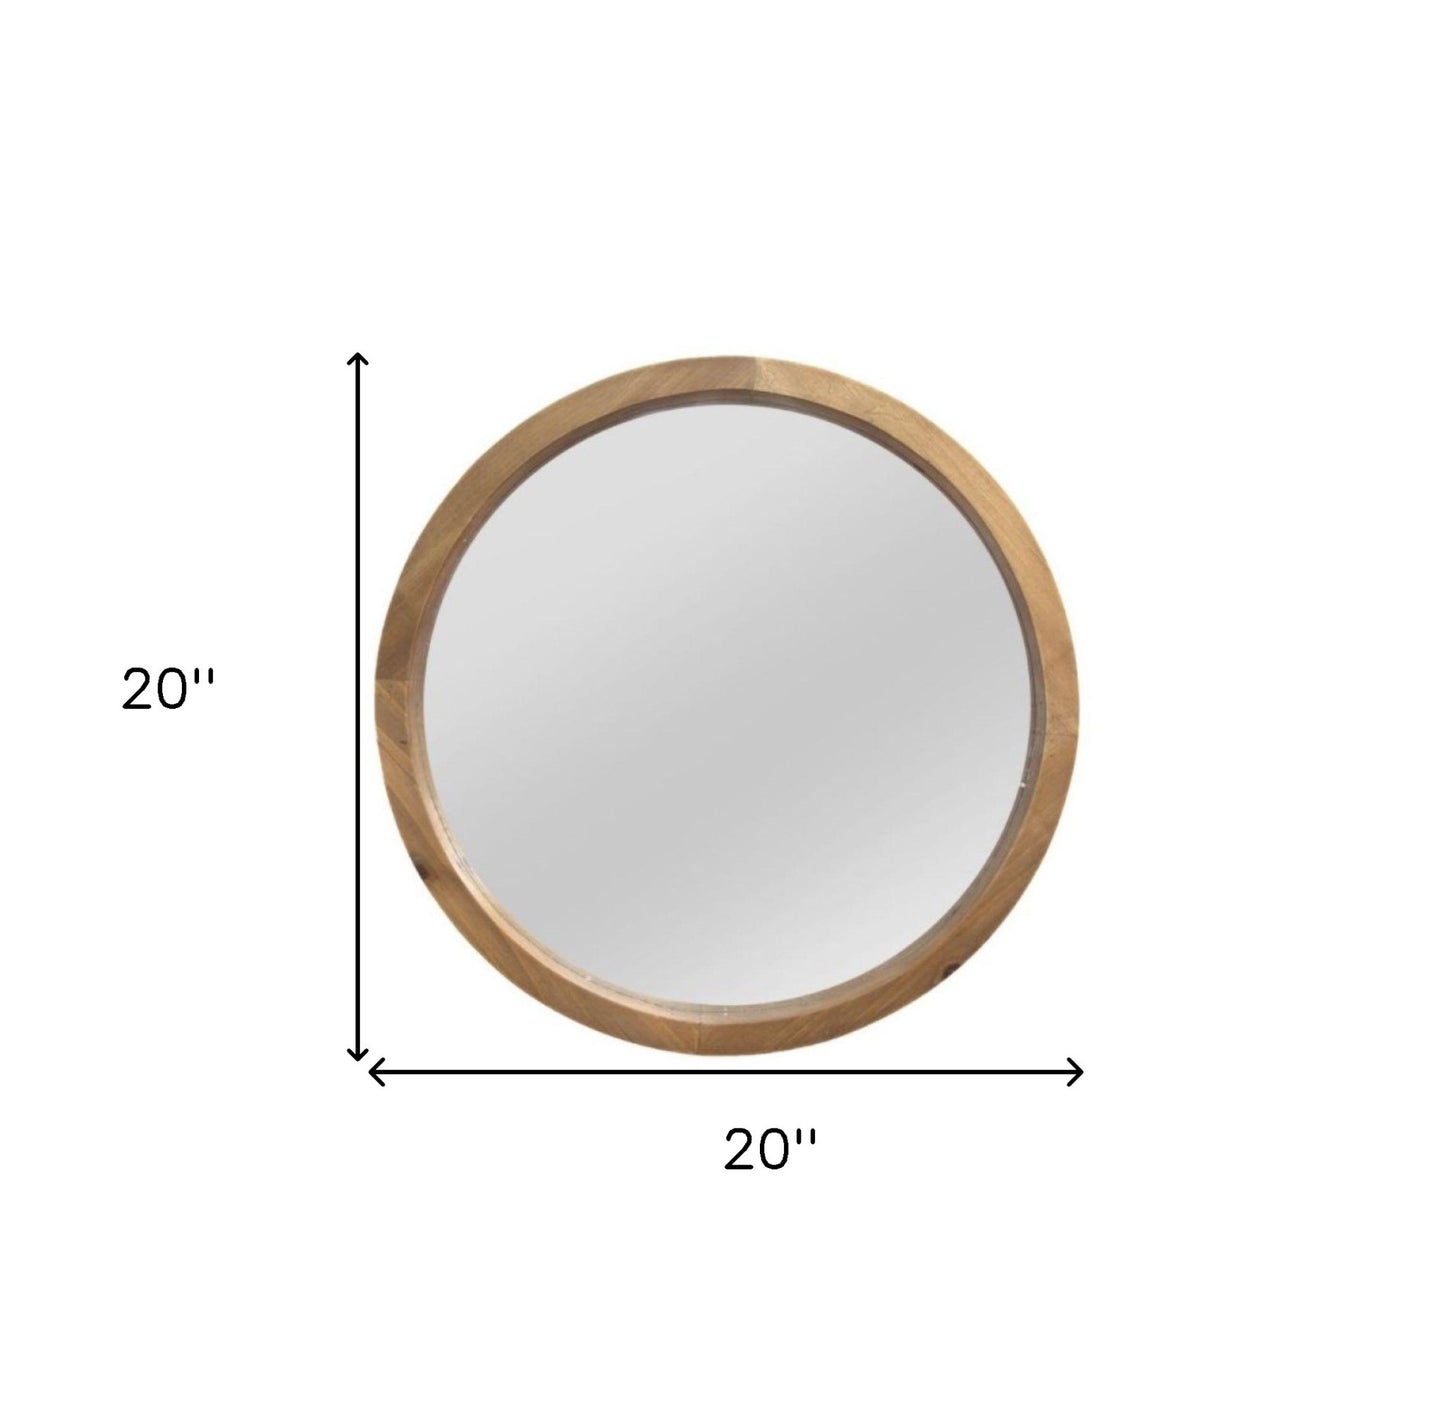 20" Chic Round Wood Framed Wall Mirror